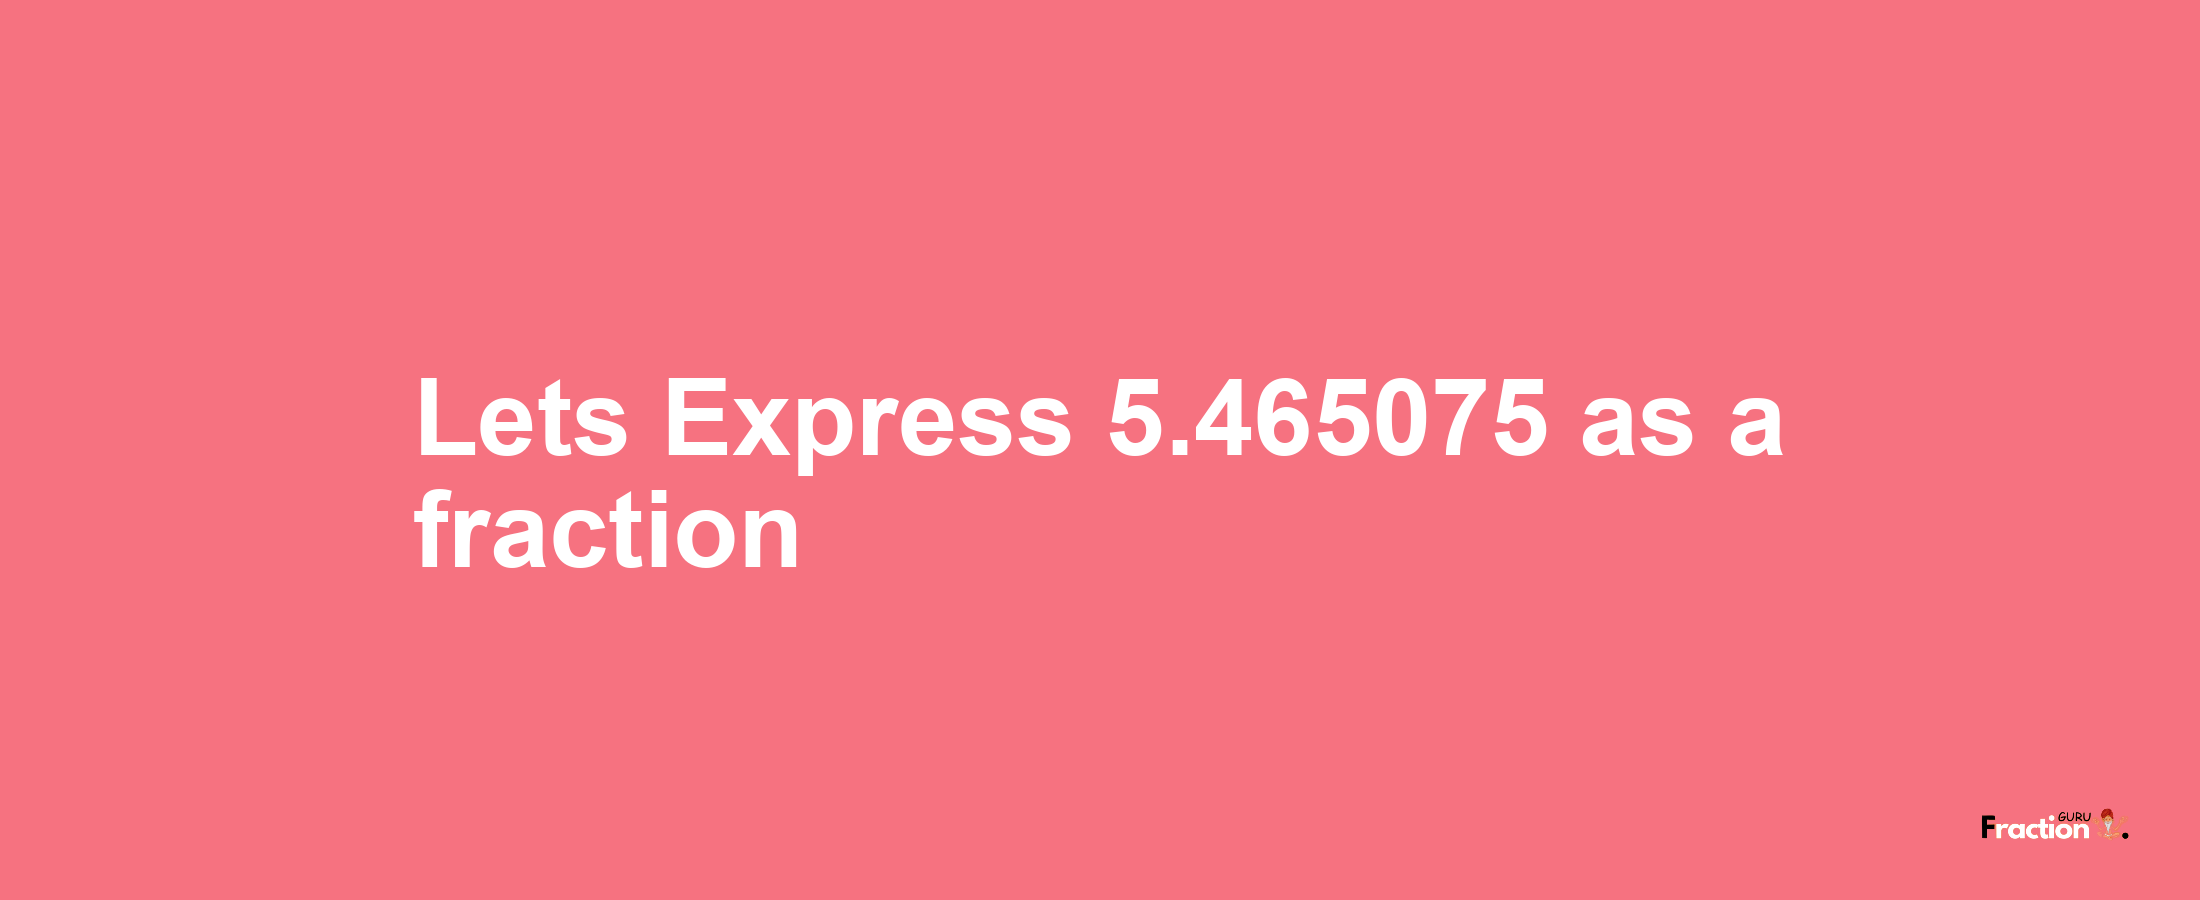 Lets Express 5.465075 as afraction